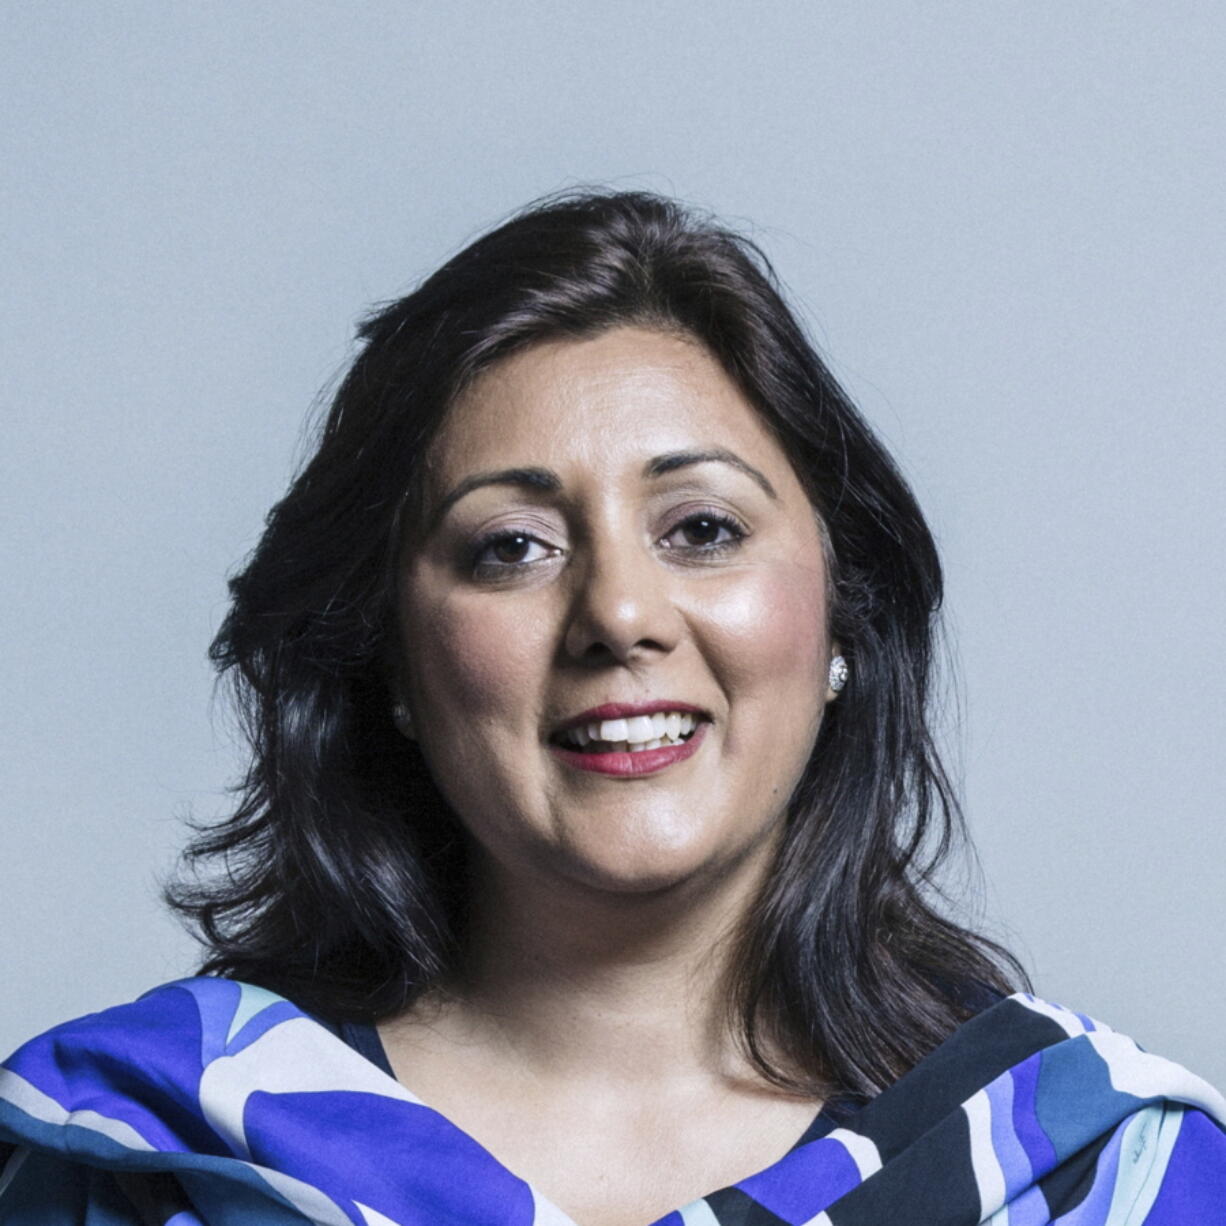 An official file portrait provided by Britain's Parliament of Conservative lawmaker Nusrat Ghani. Ghani, a former minister in Britain's Conservative government says she was told that her Muslim faith was a reason she was fired. The claim has deepened the rifts roiling Prime Minister Boris Johnson's governing party.